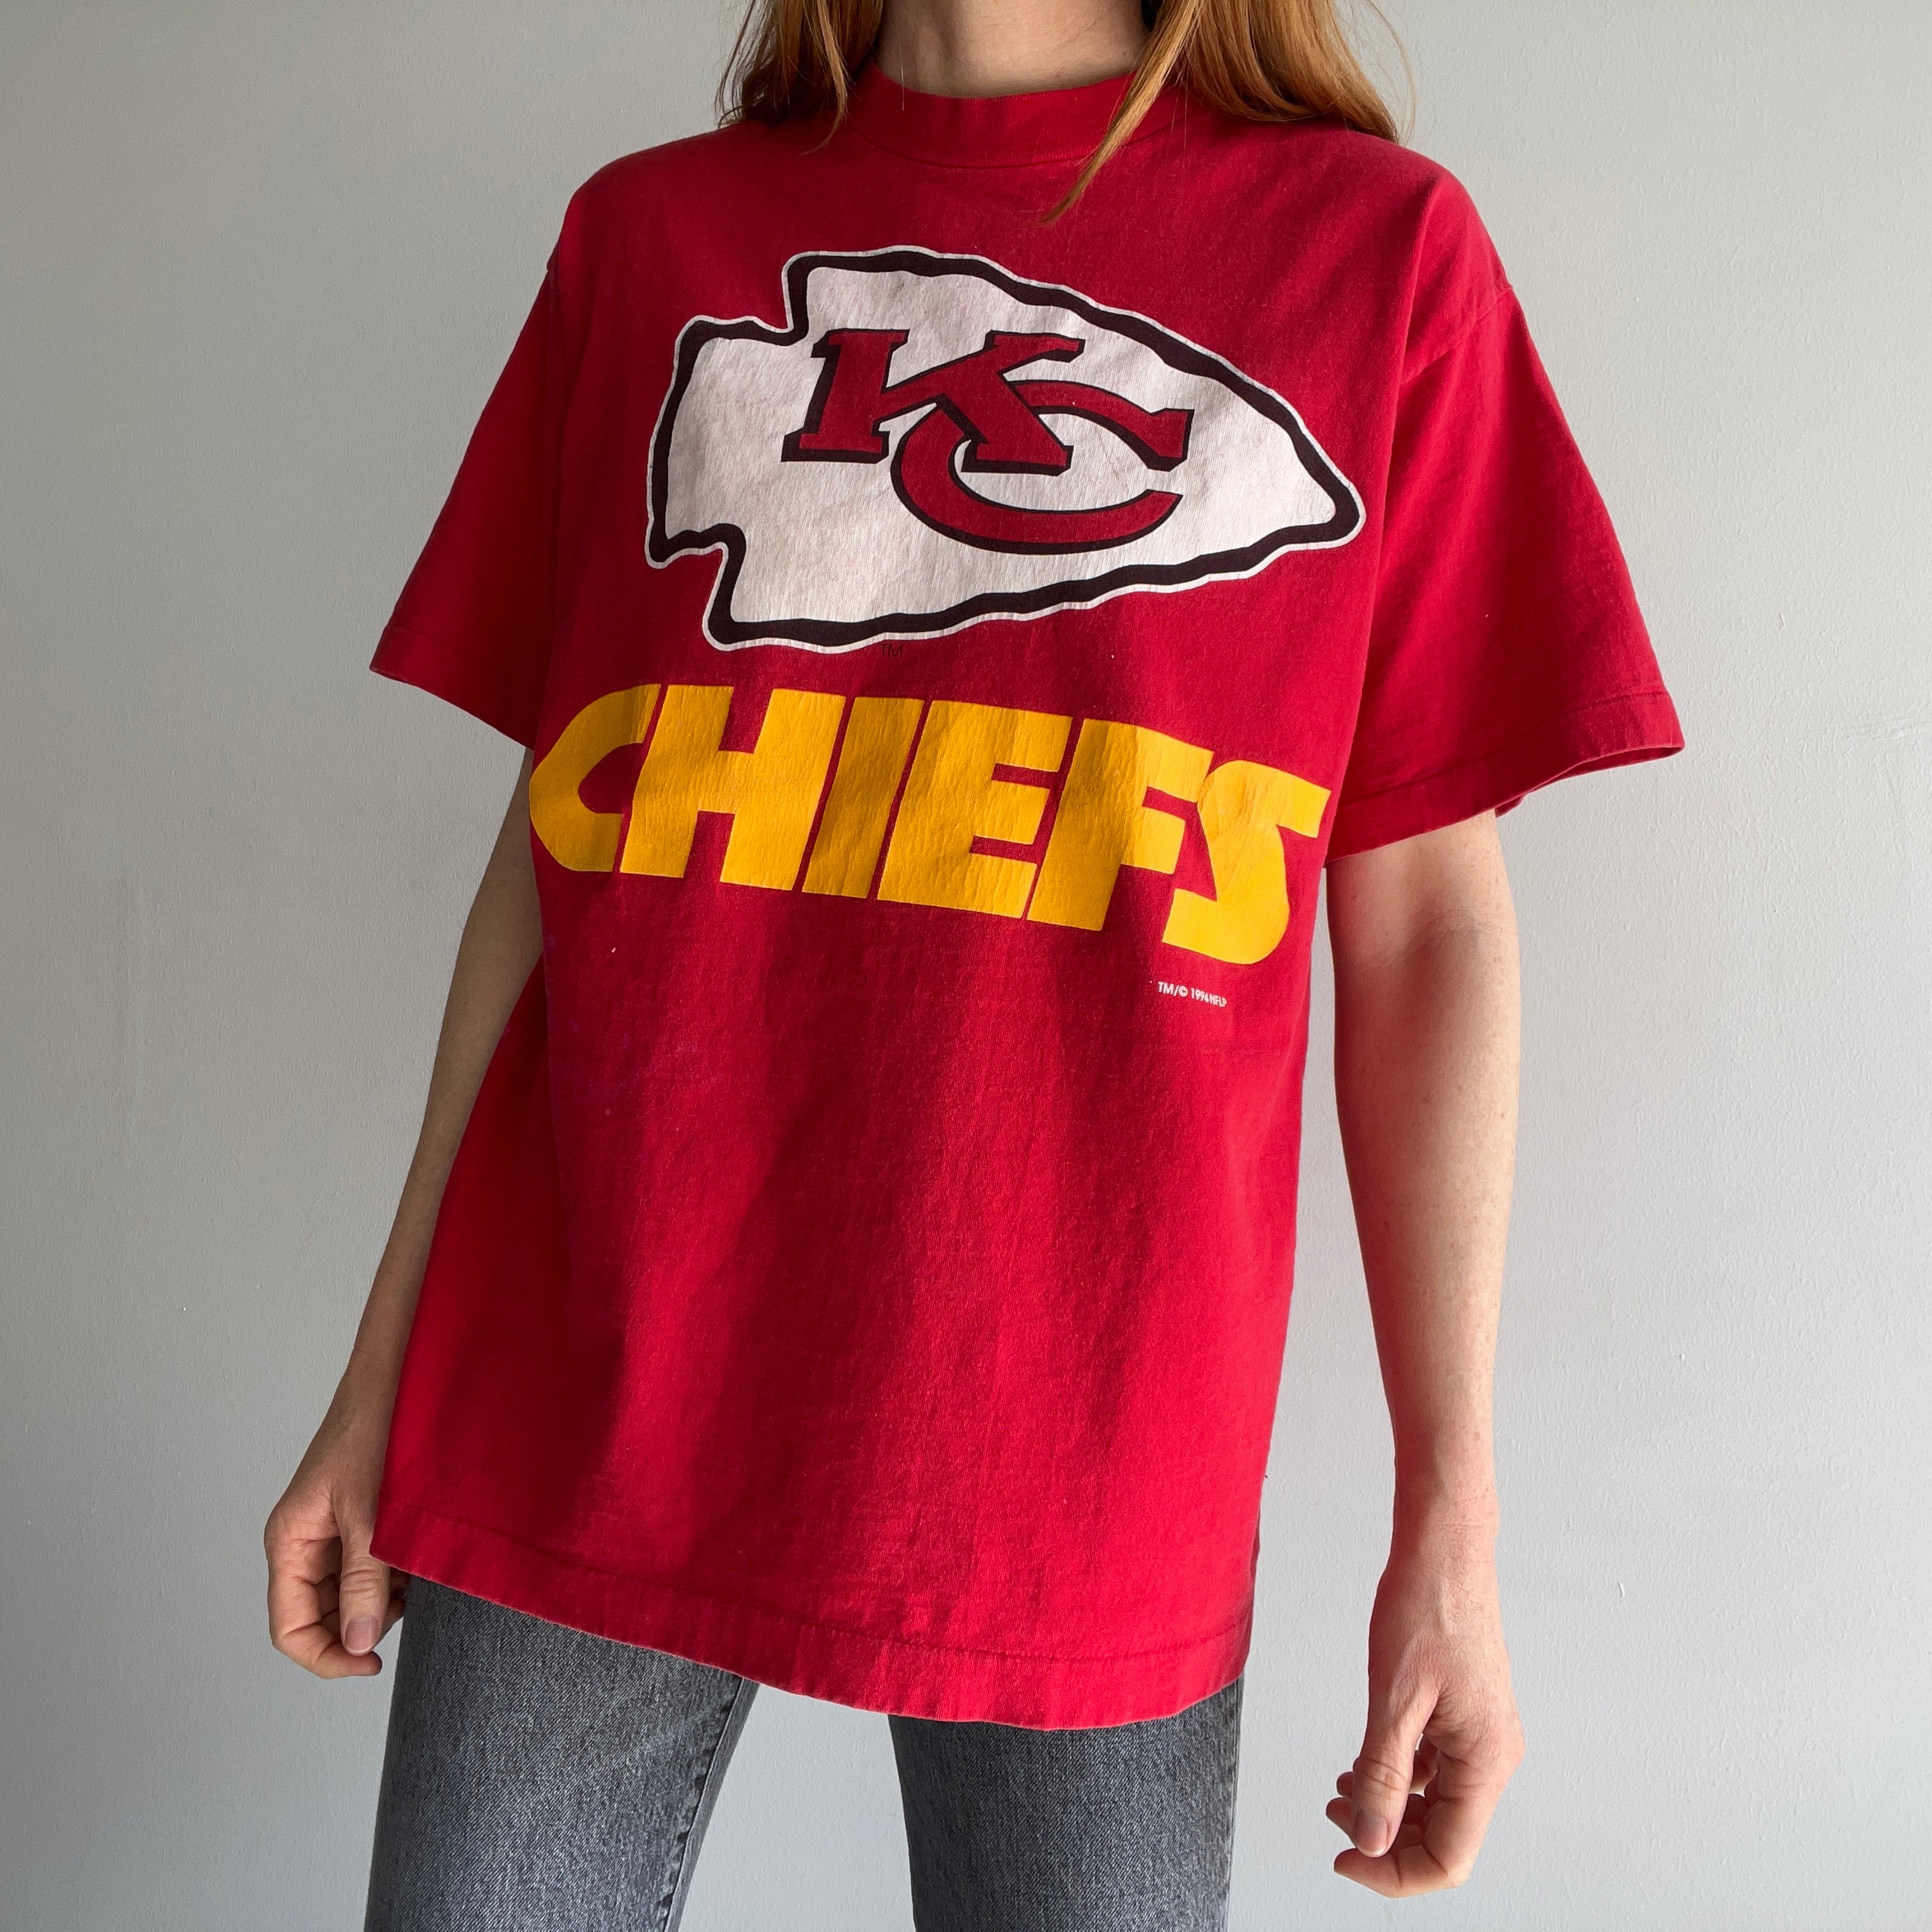 1994 Kansas City Chiefs T-Shirt - THE CHAMPS! – Red Vintage Co